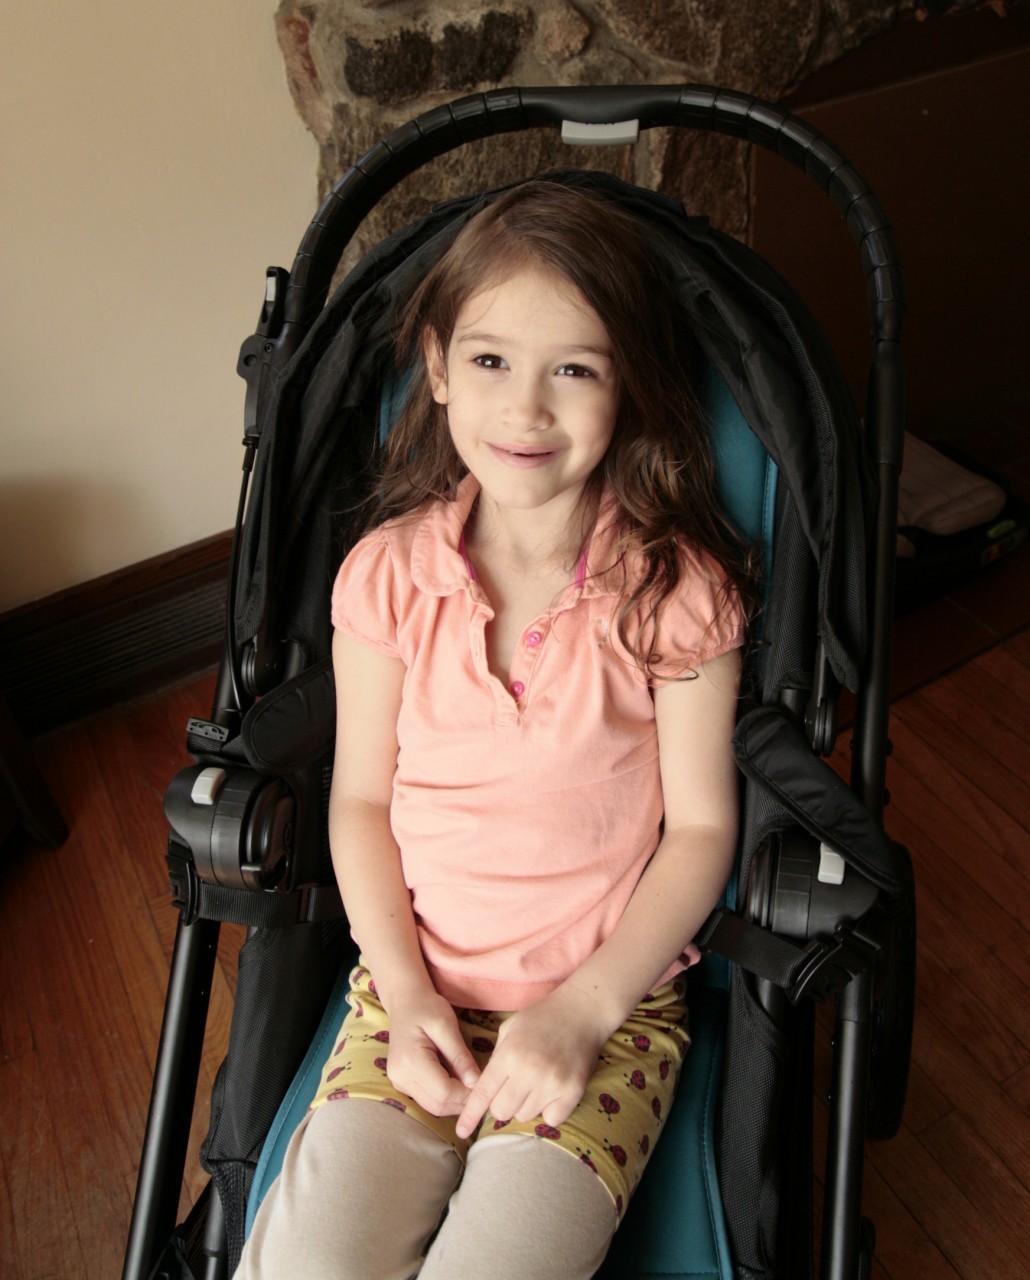 stroller for five year old